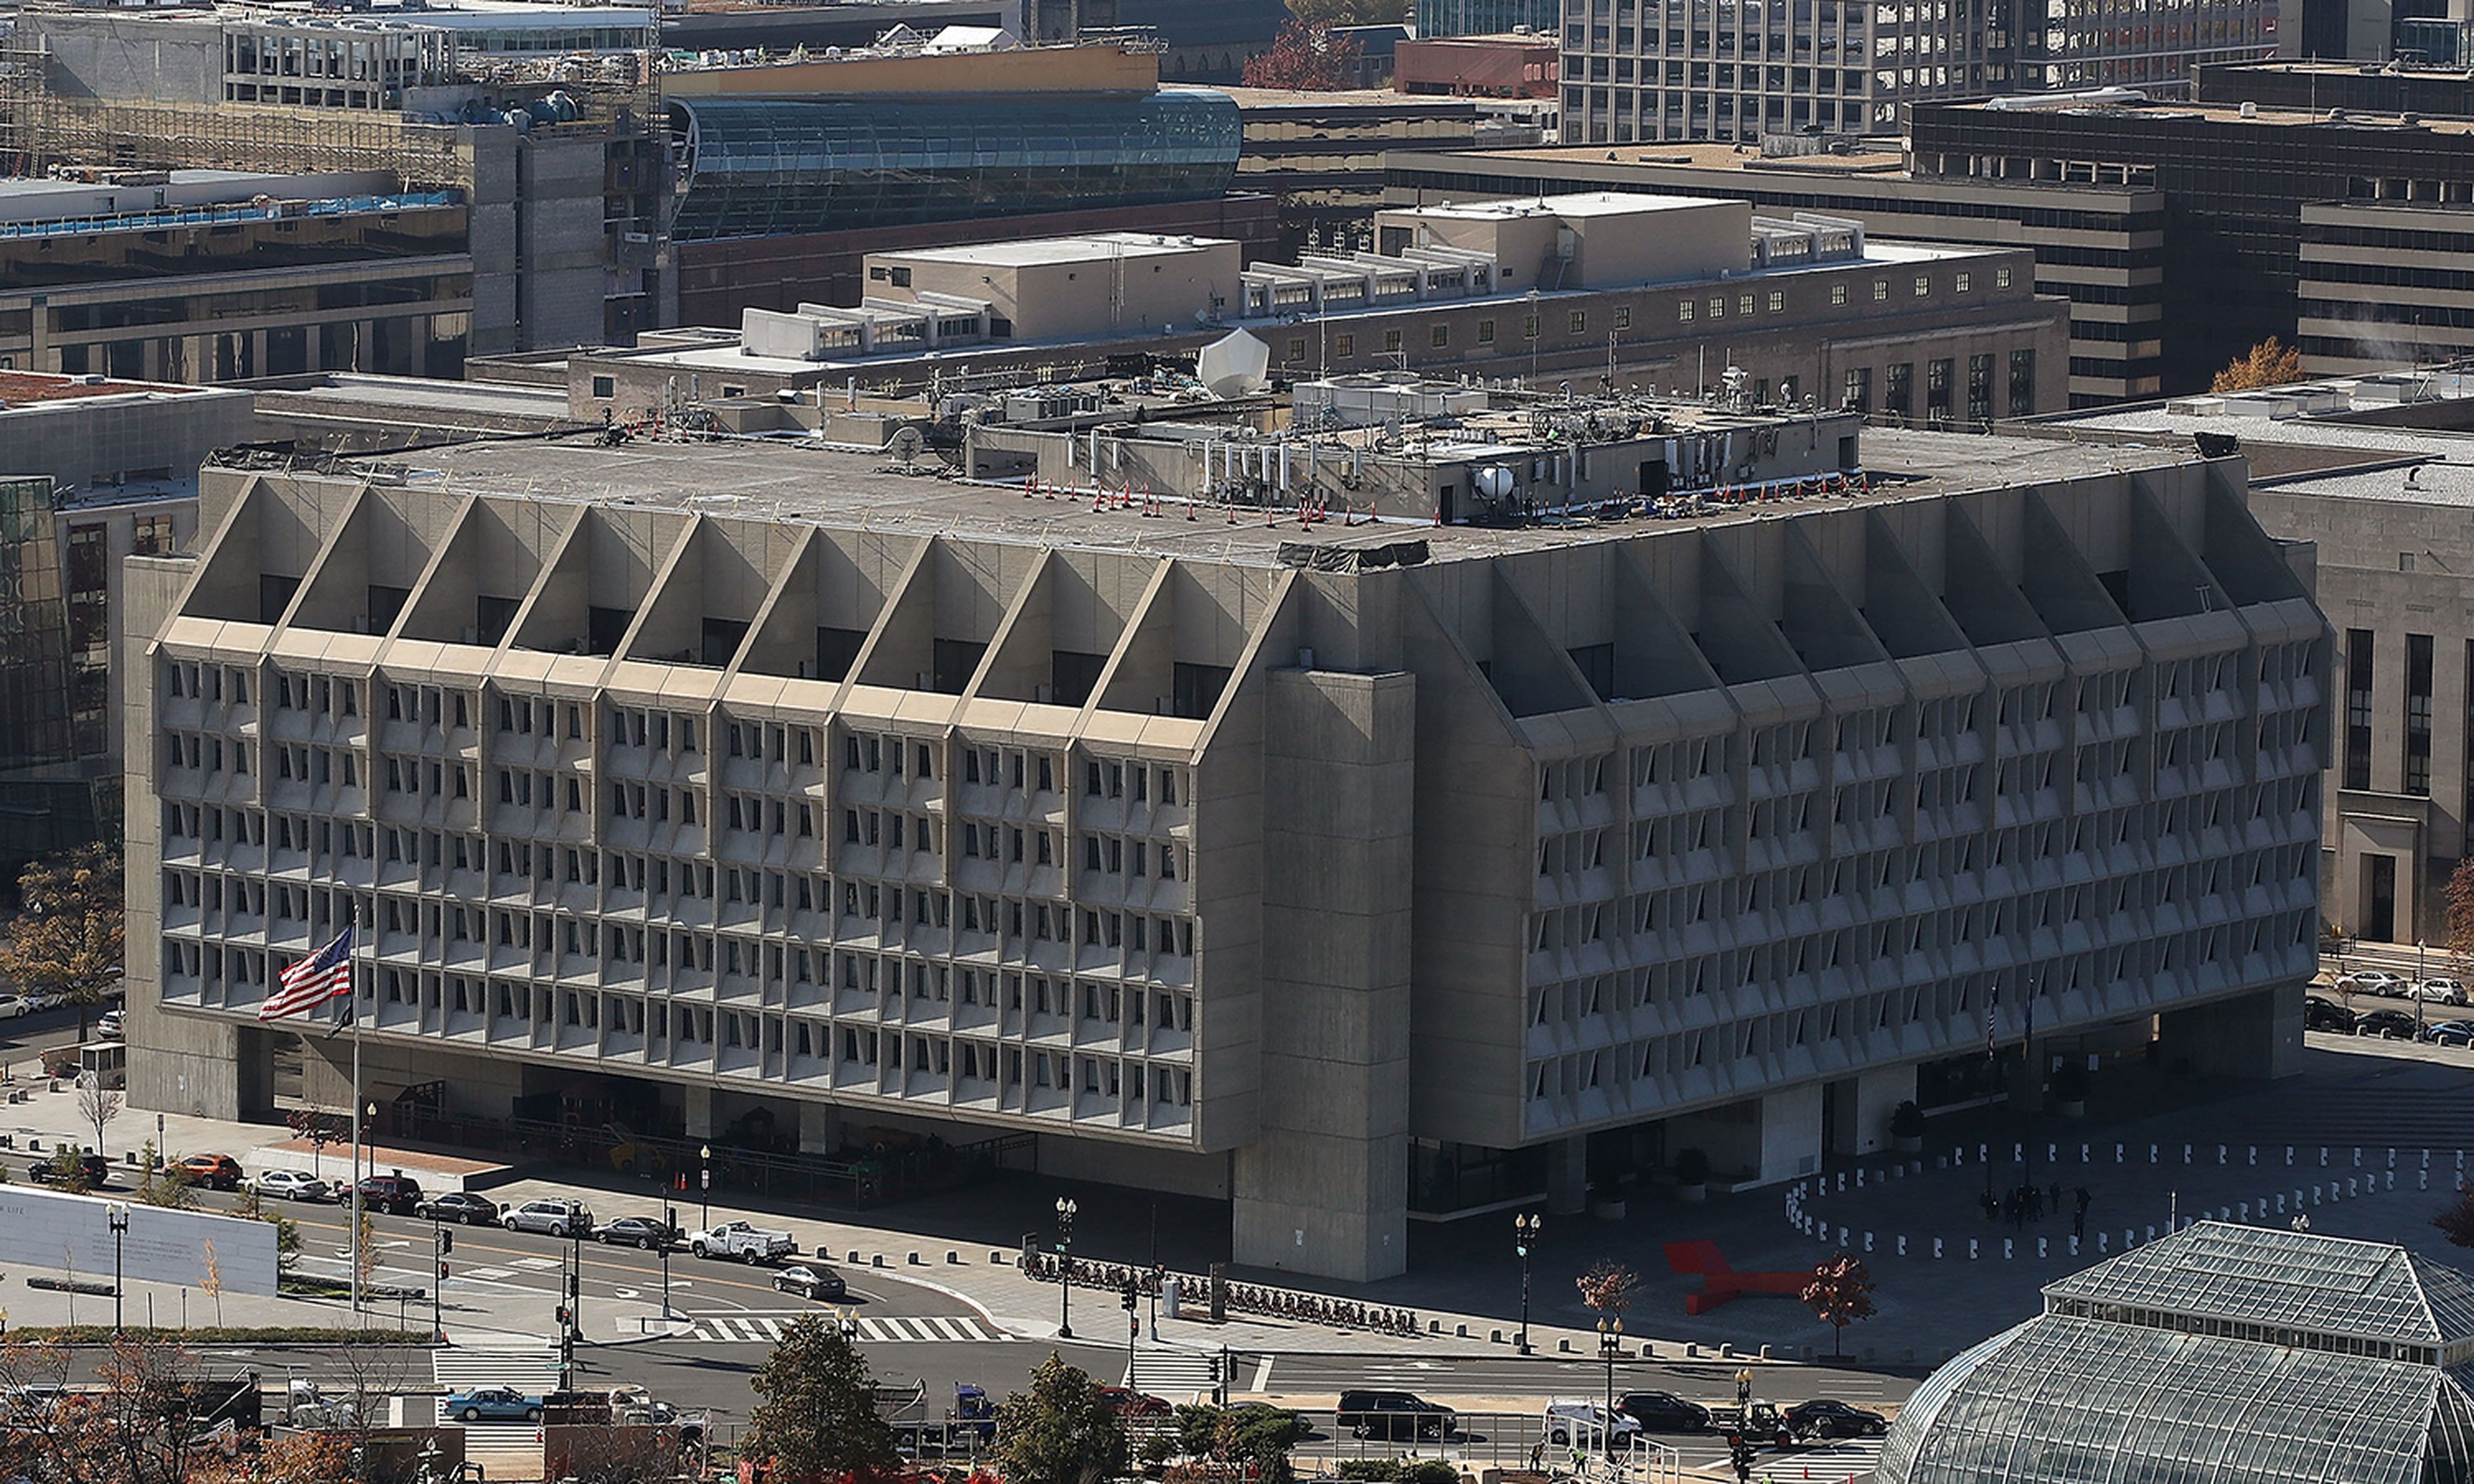 The headquarters of the U.S. Department of Health and Human Services